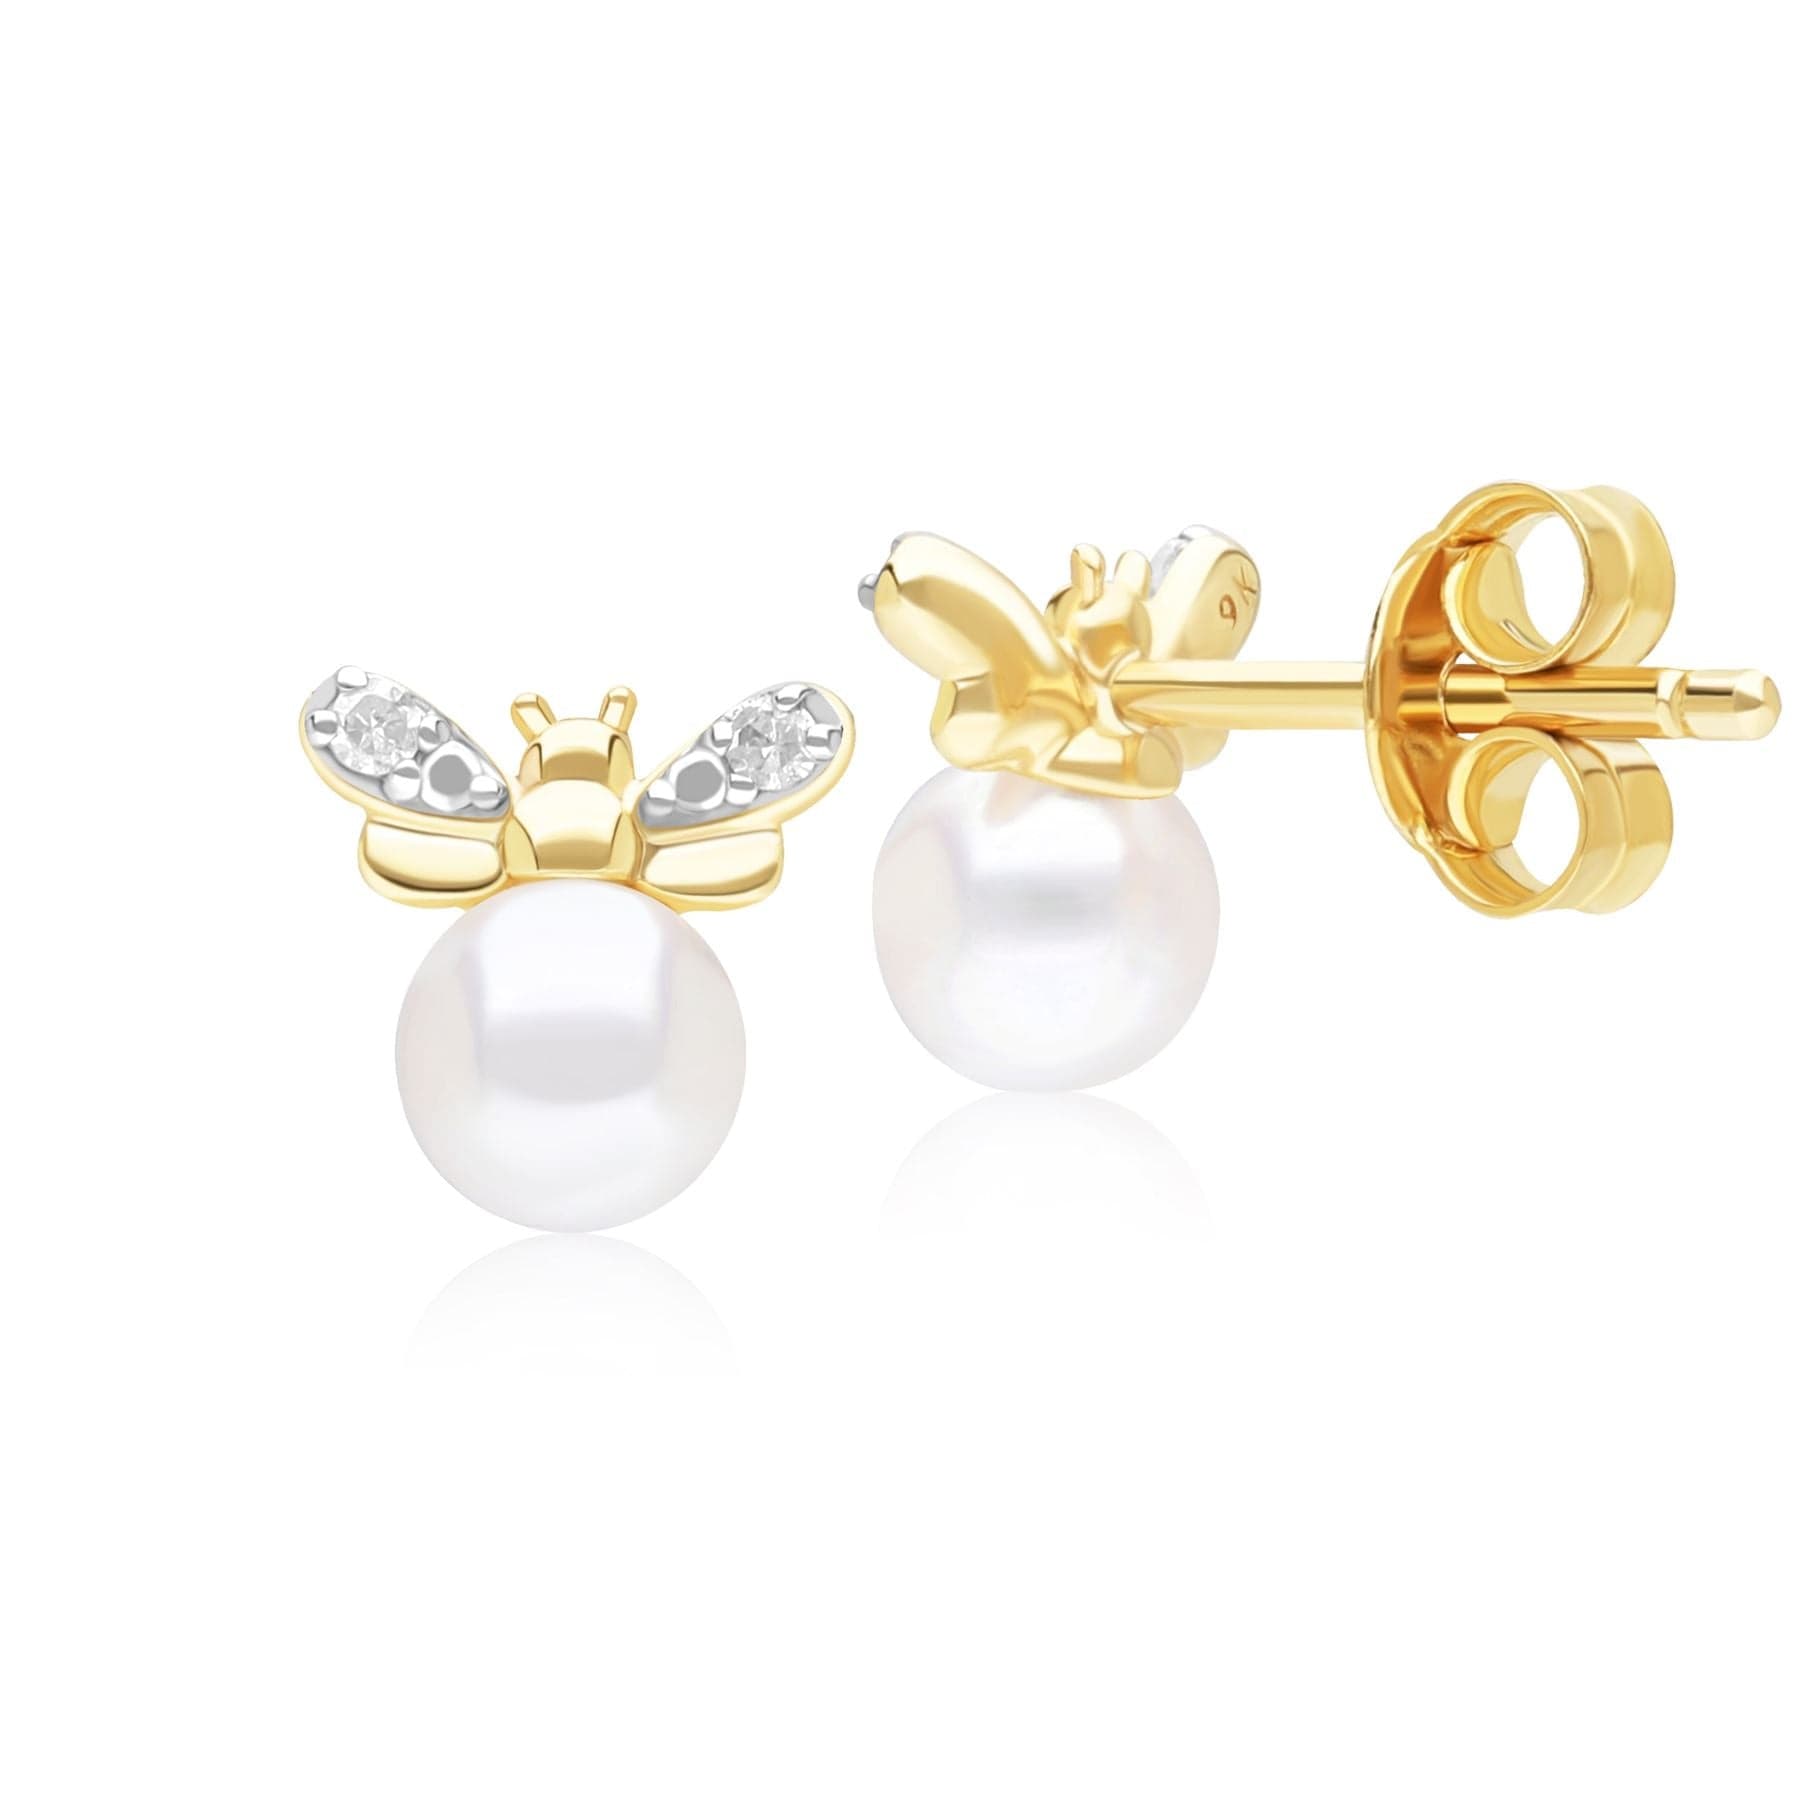 Honeycomb Inspired Pearl and Diamond Bee Stud Earrings in 9ct Yellow Gold Back  135E1871019